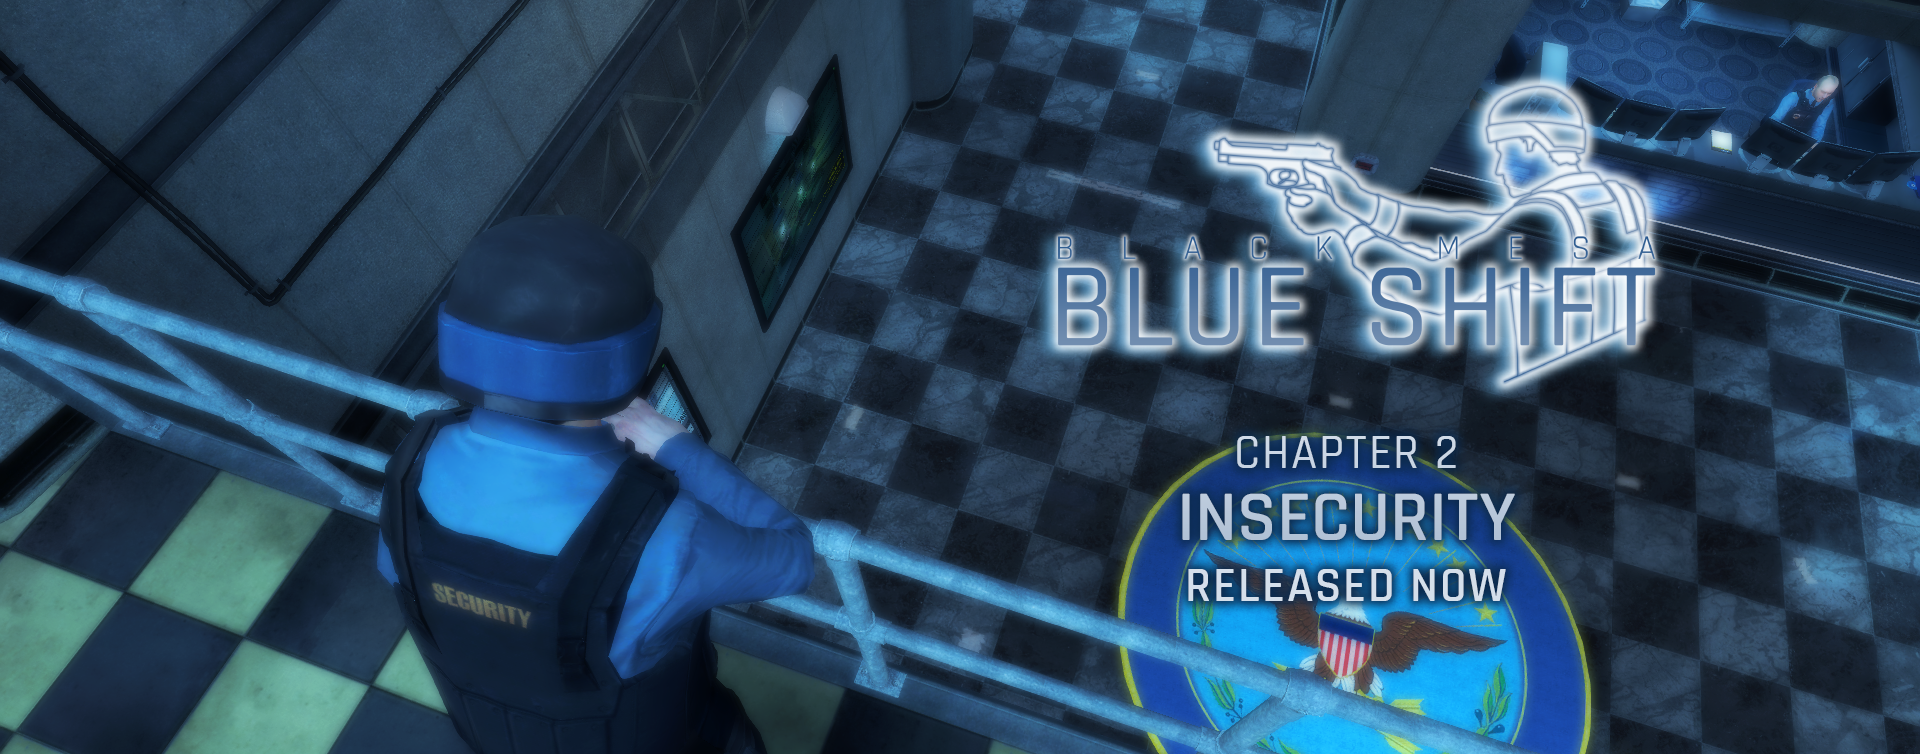 Black Mesa: Blue Shift - Chapter 2: Insecurity Release